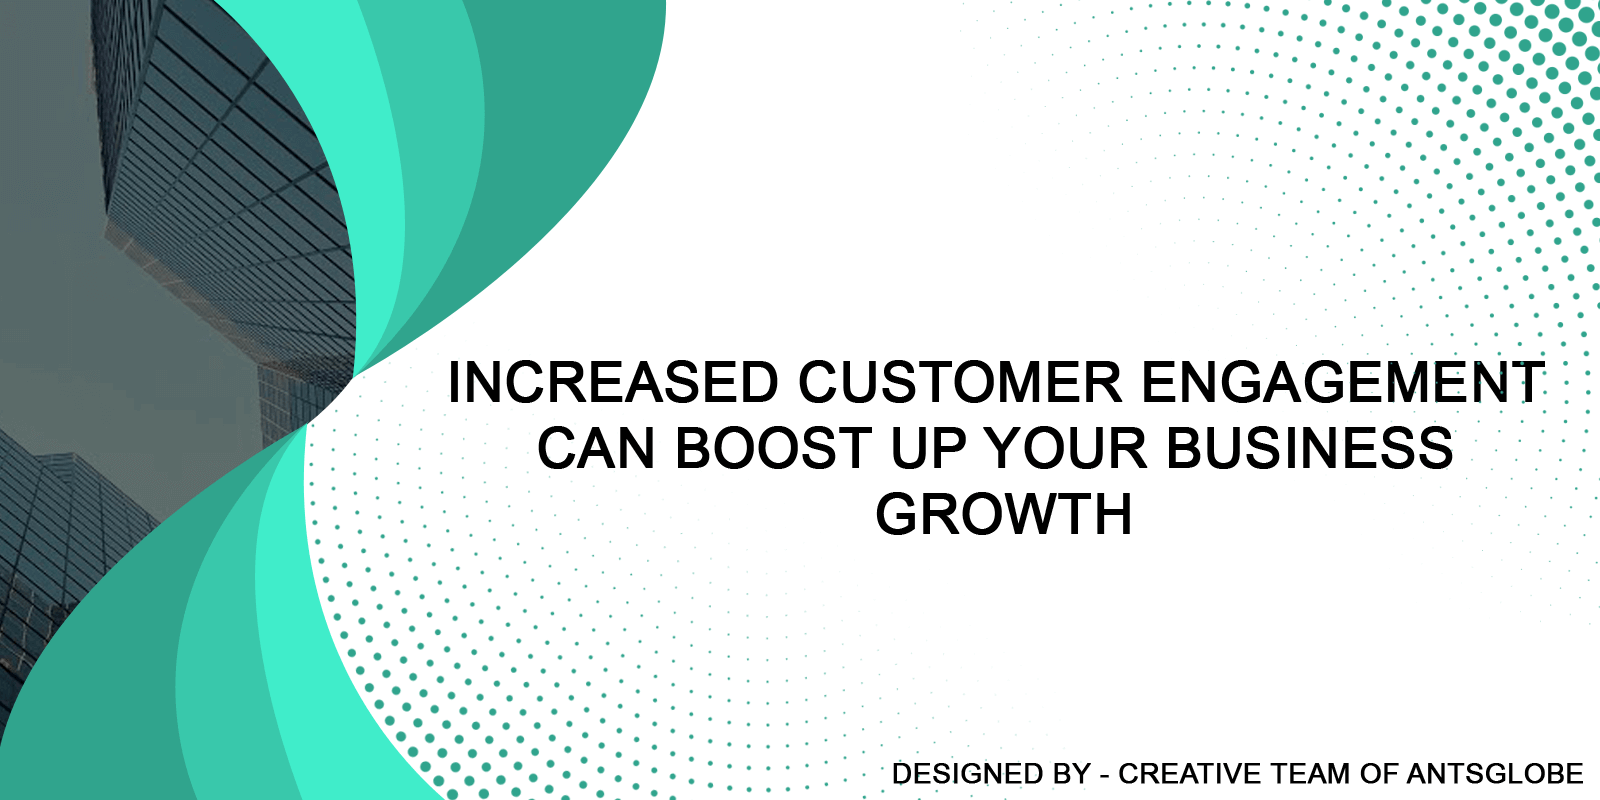 how-customer-engagement-can-boost-up-growth-of-your-business